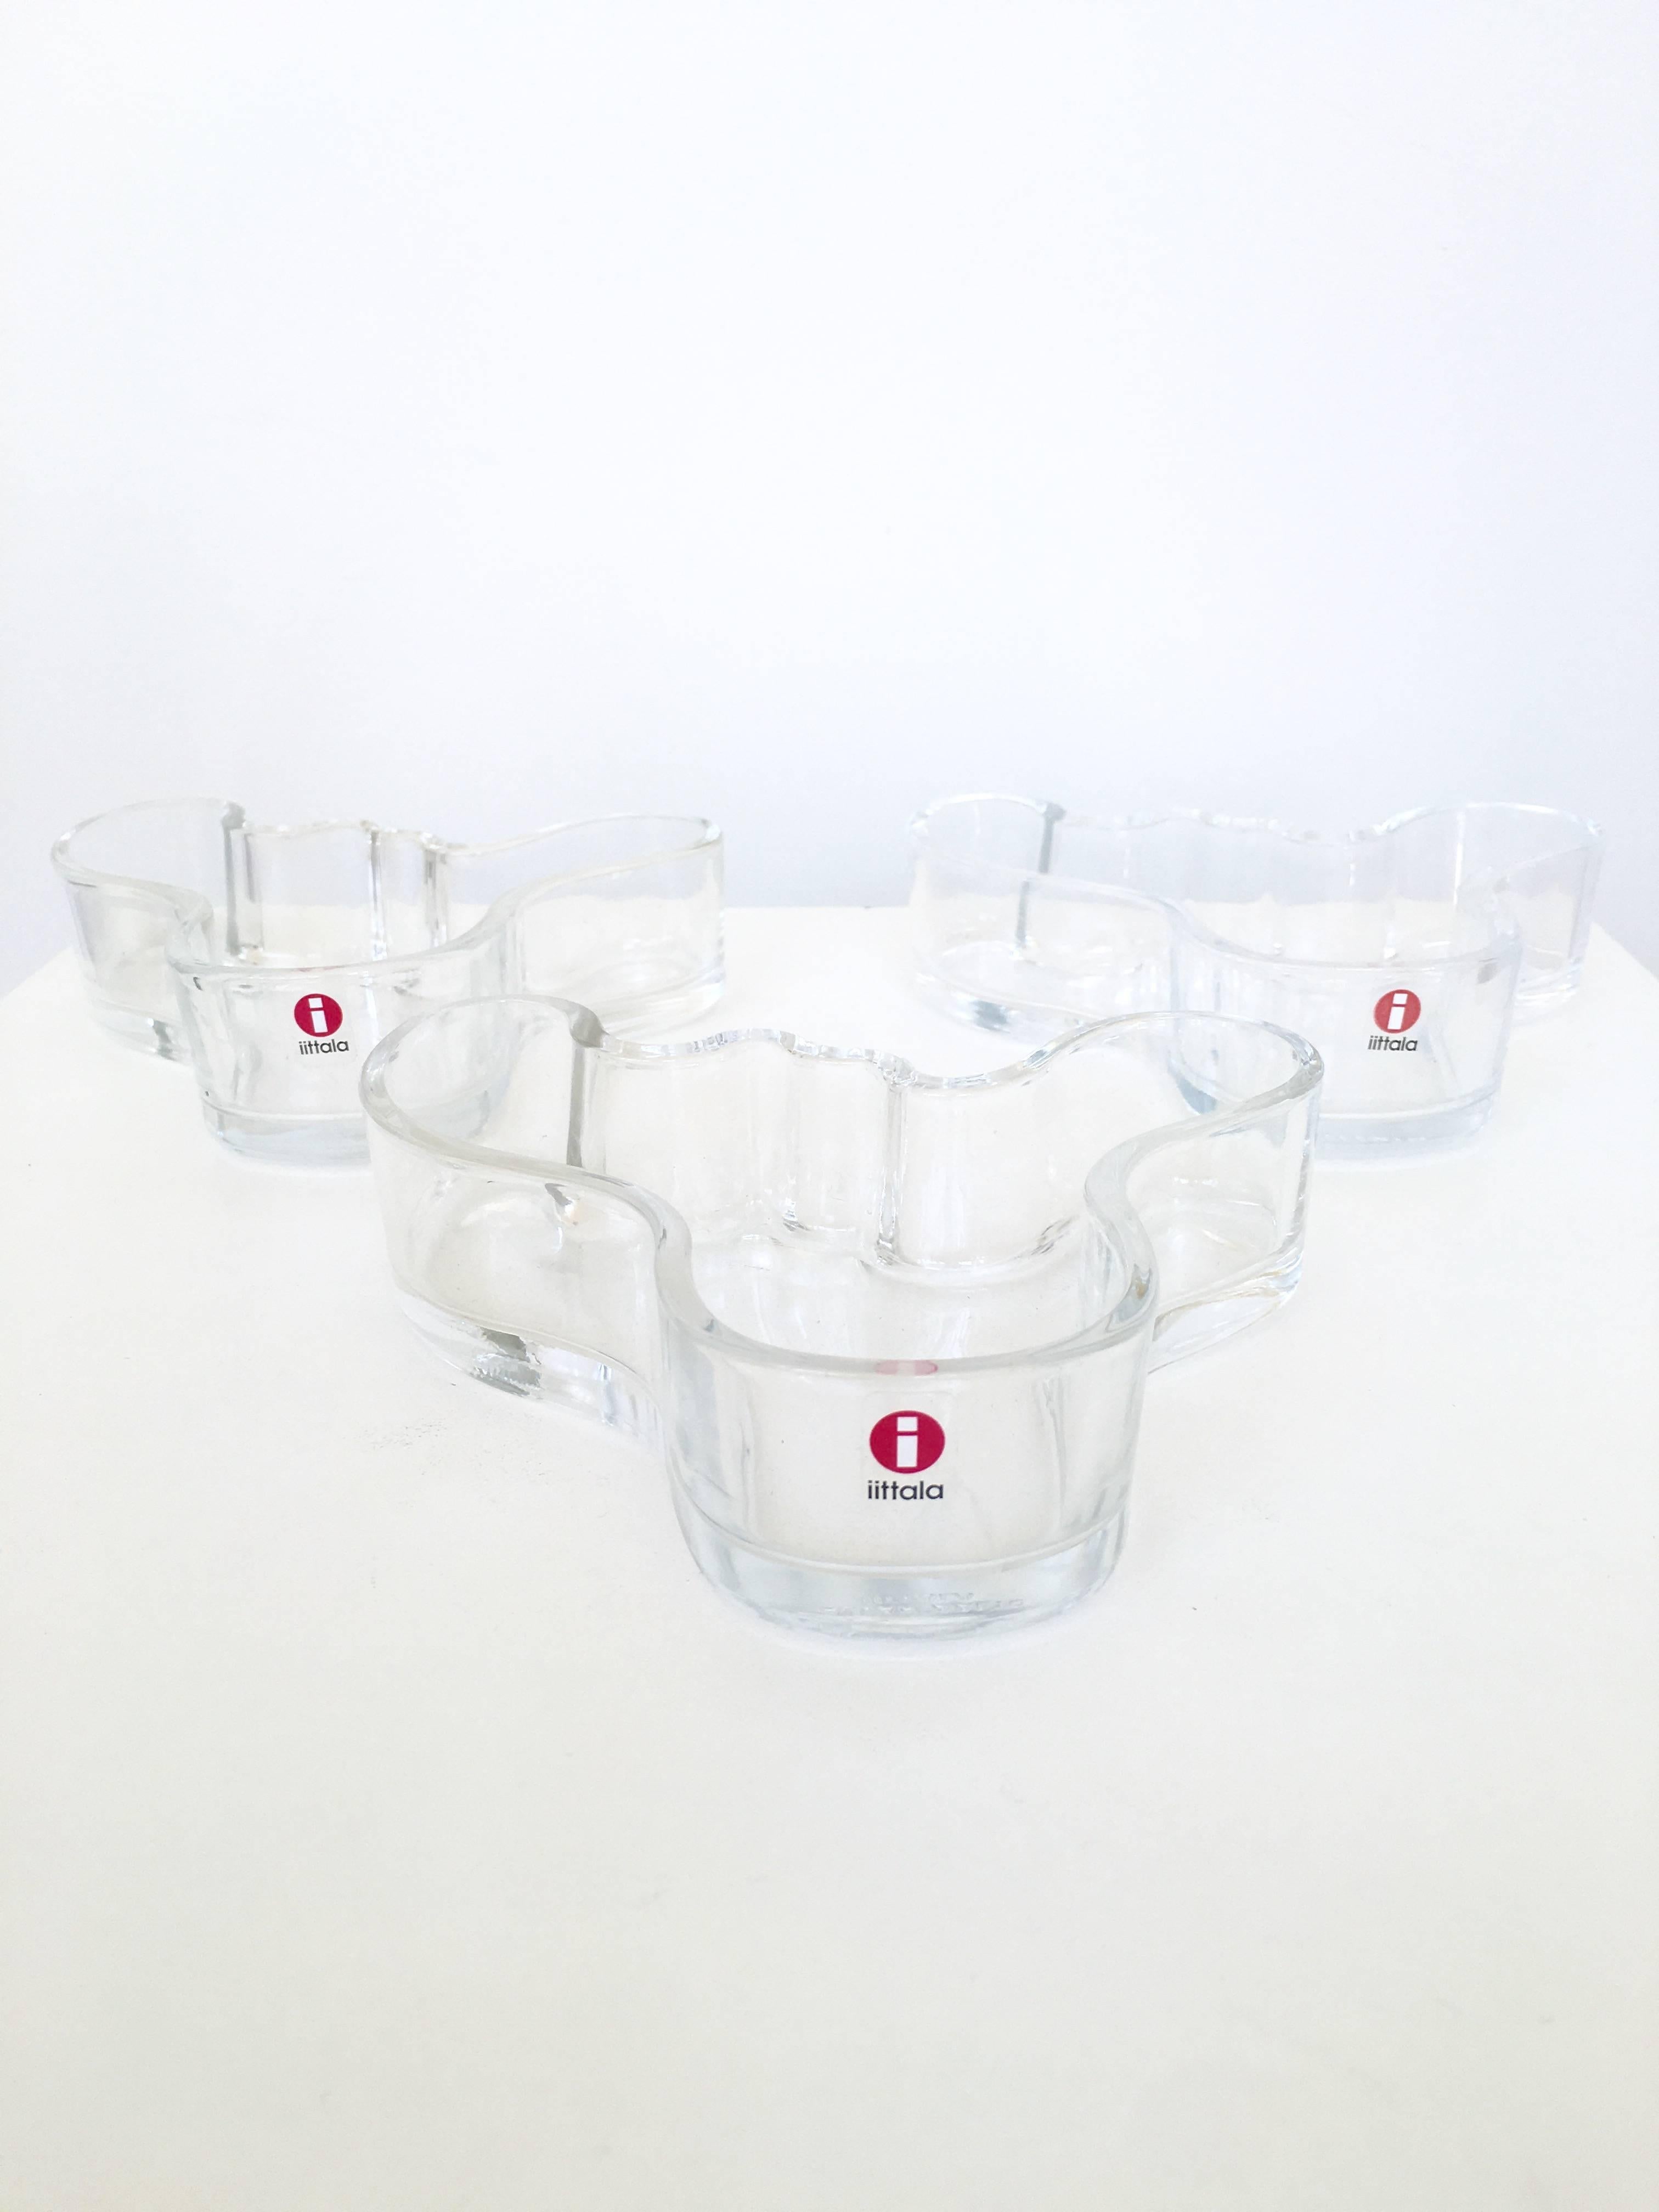 The candy dish or tray version of the iconic Alvar Alto glass vase by Ittala, Italy. Perfectly formed amoebic shape which is very sculptural especially when all three are grouped together. Great for serving nuts and candies.